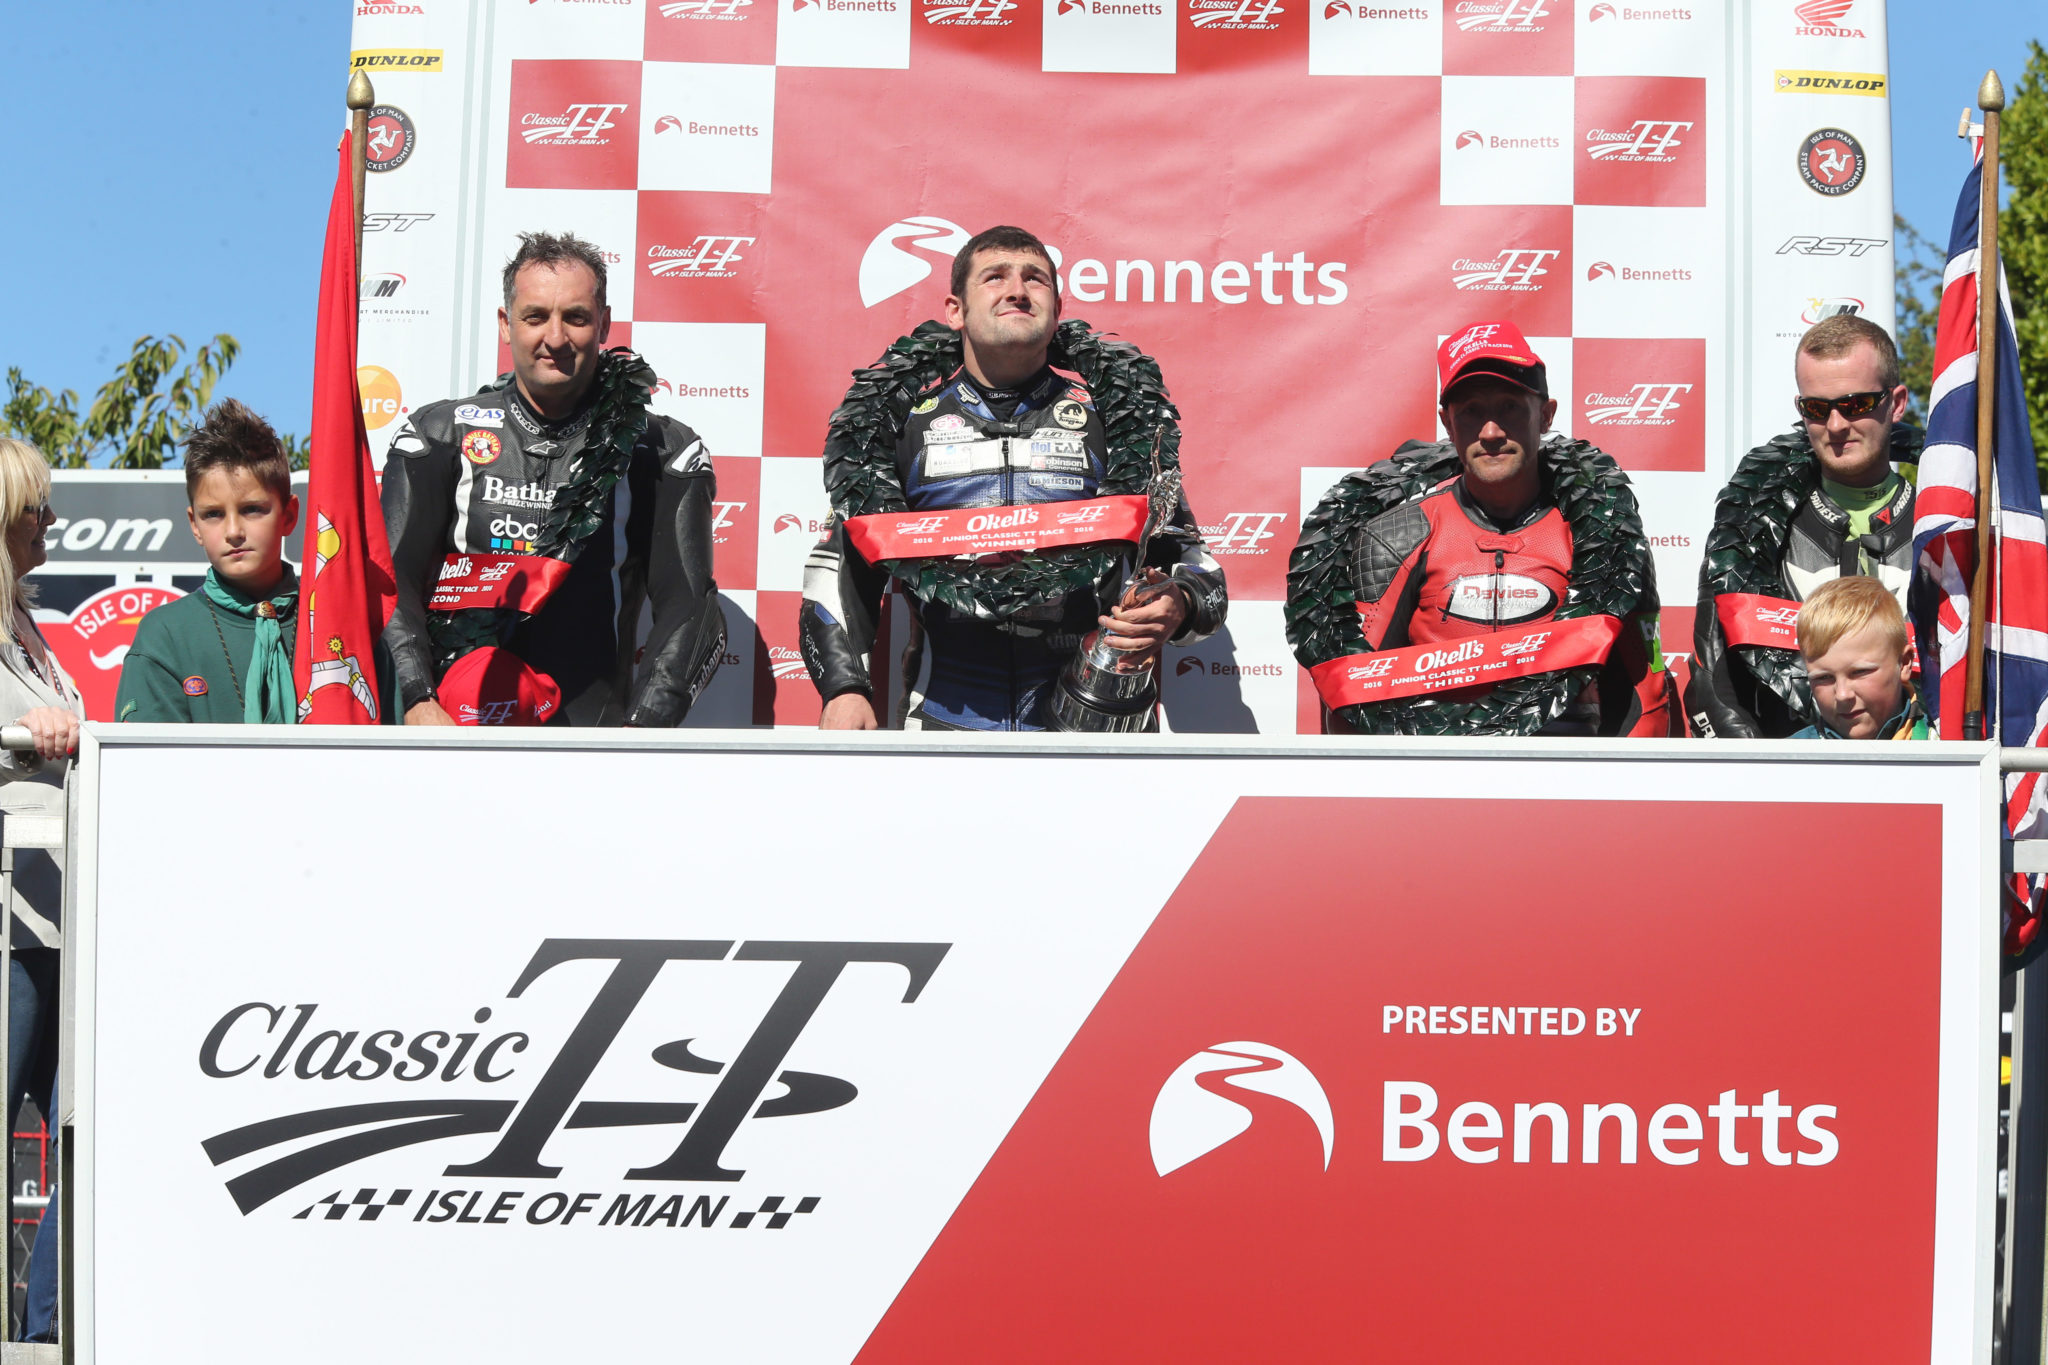 PACEMAKER, BELFAST, 29/8/2016: Michael Dunlop (Black Eagle MV Agusta) celebrates winning the 350cc race at the Classic TT today with runner up Michael Rutter and third placed Alan Oversby. PICTURE BY STEPHEN DAVISON